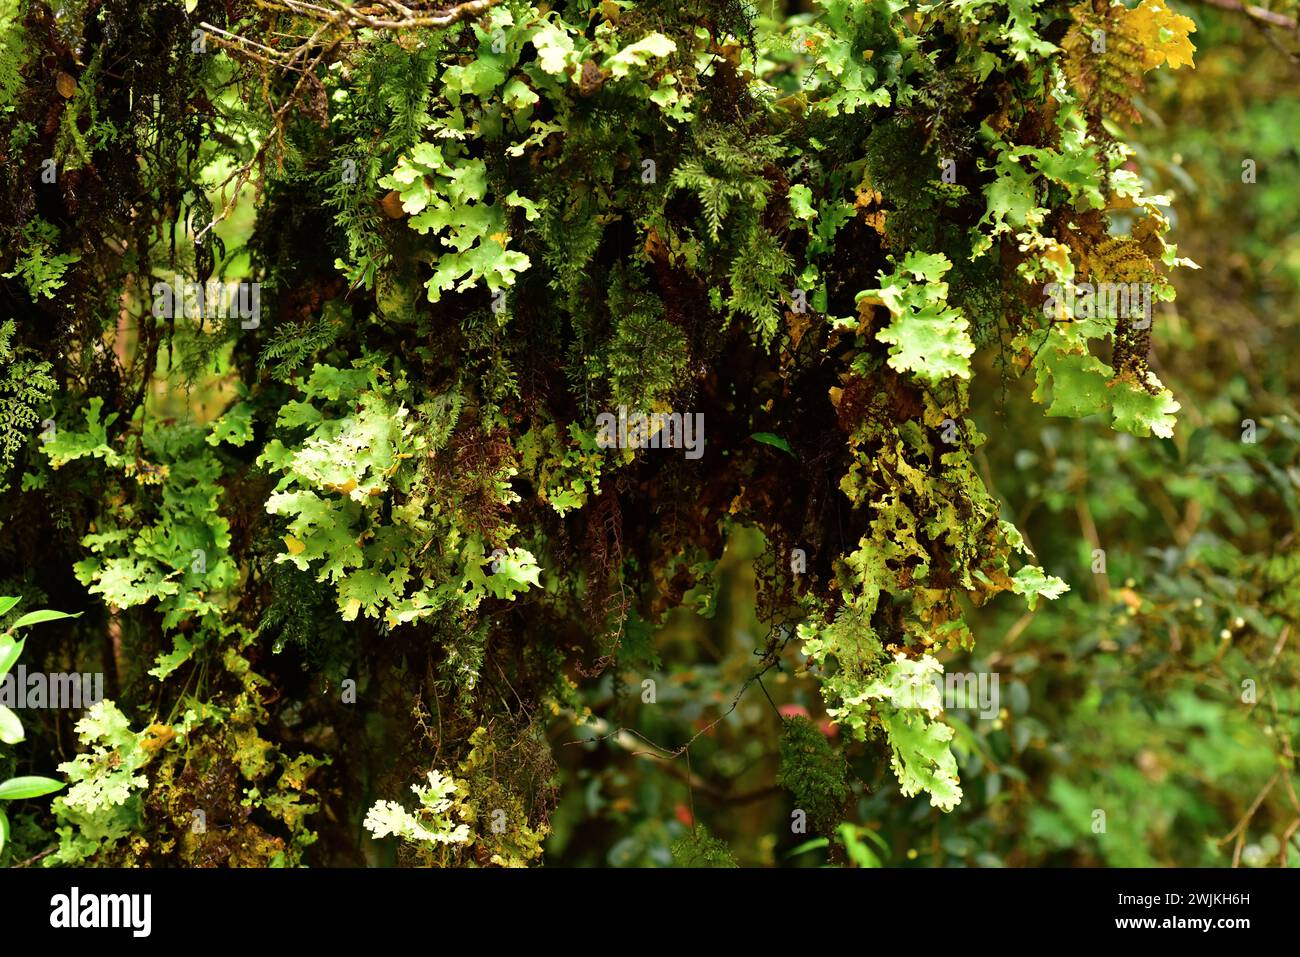 Pseudocyphellaria glabra is a foliose lichen growing with the fern Hymenophyllum on a tree bark. This photo was taken in Alerce Andino National Park, Stock Photo